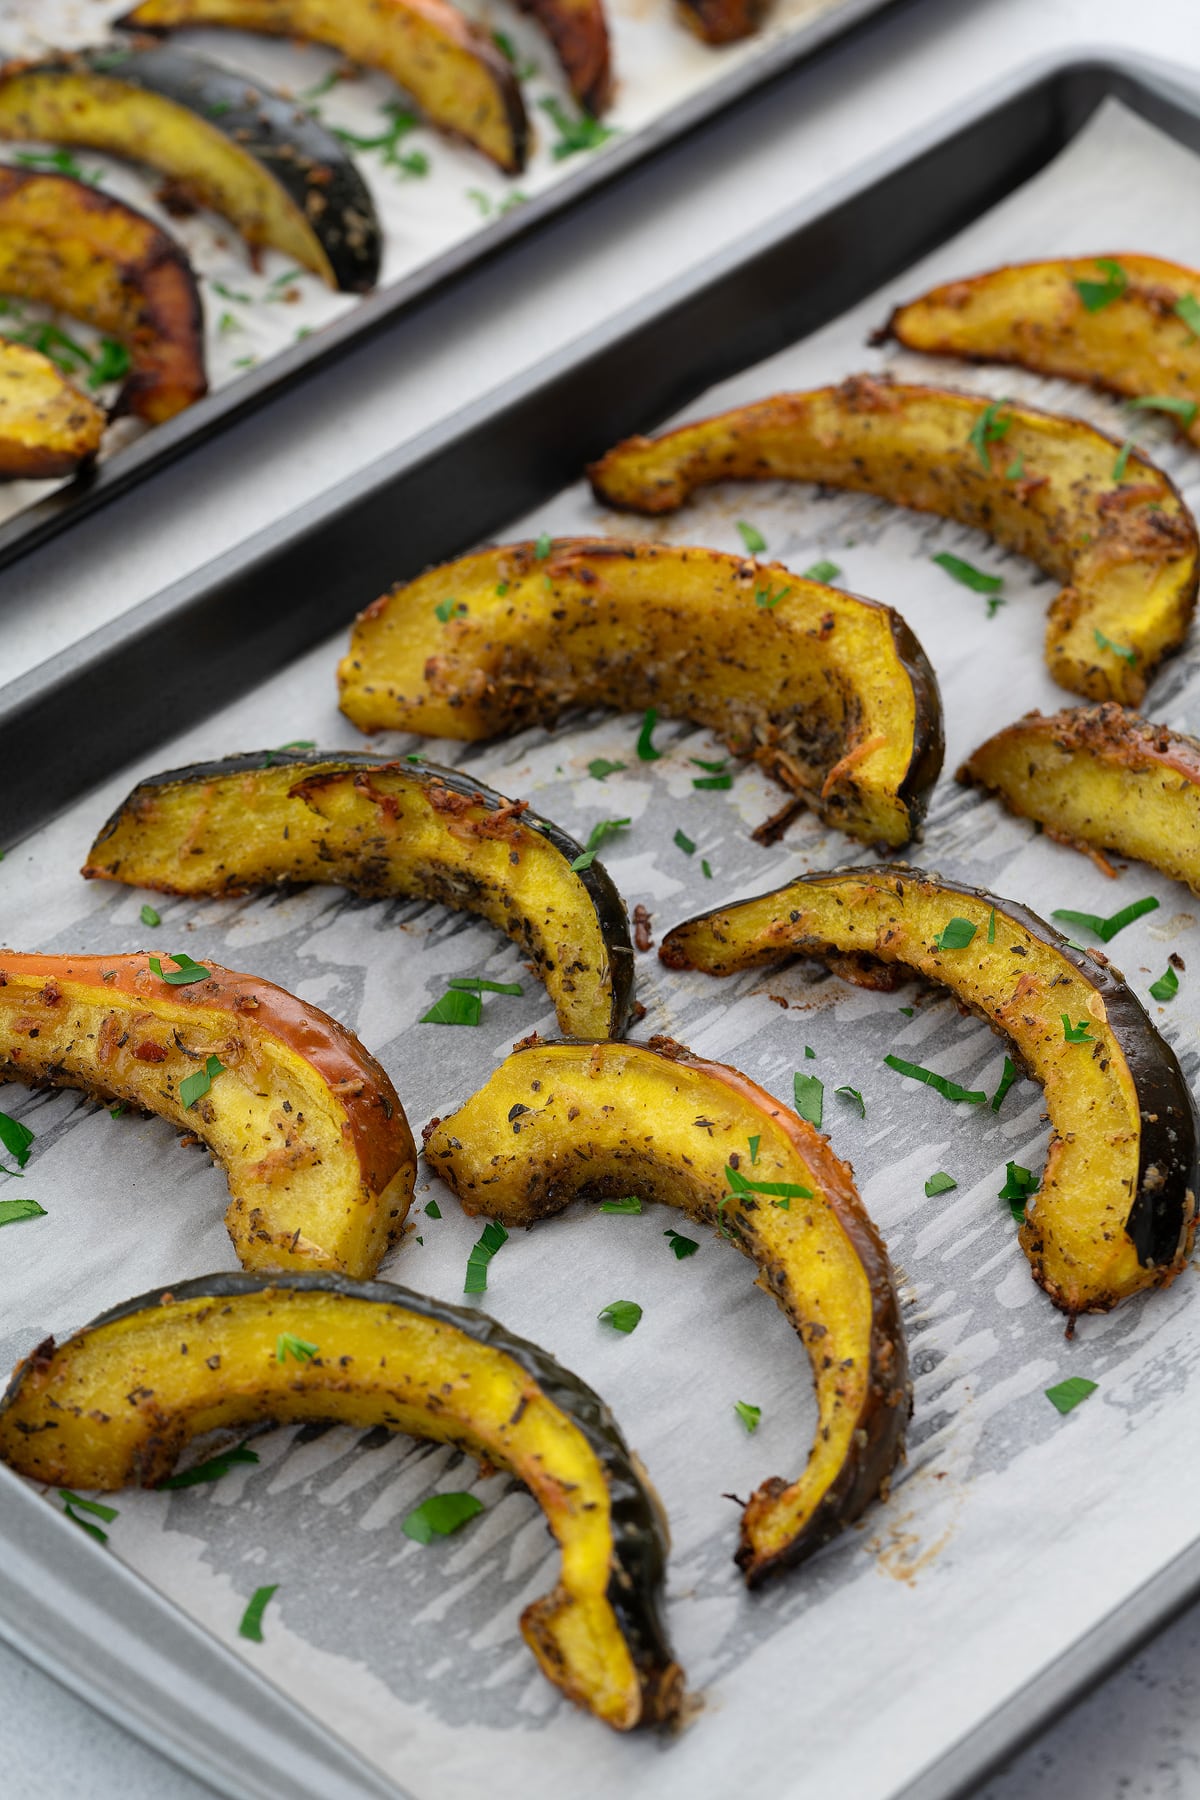 Slices of roasted acorn squash in a baking tray, presented on a white table.